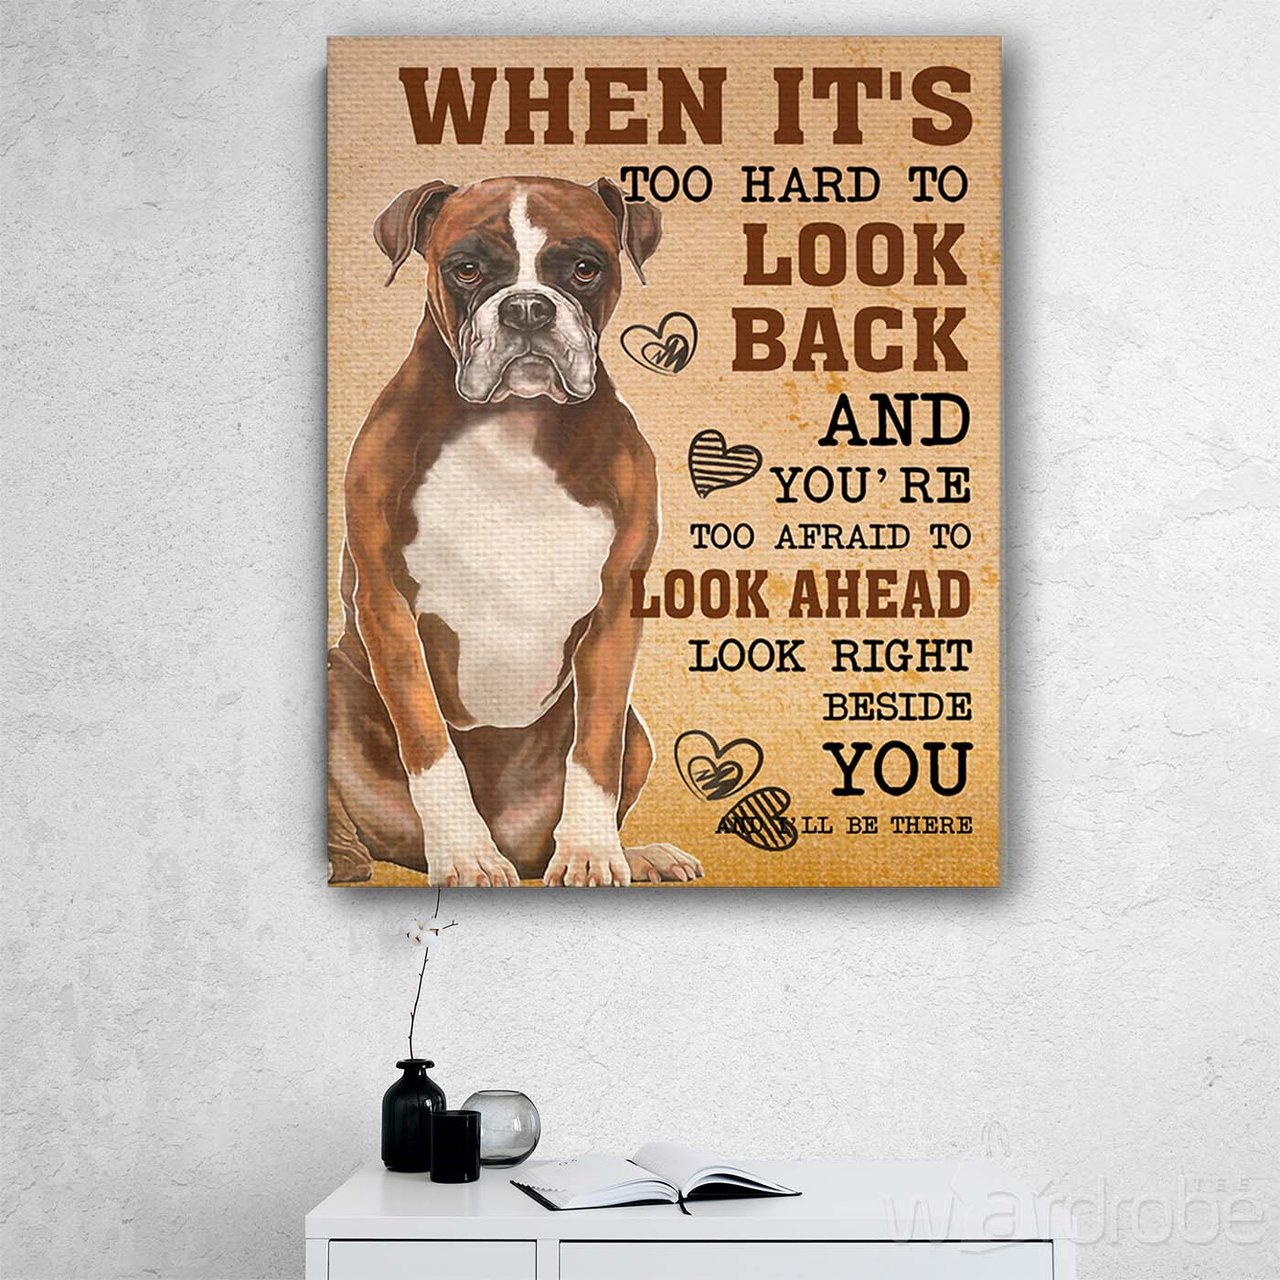 Free Look Right Beside You I'll Be There Boxer Dog Poster